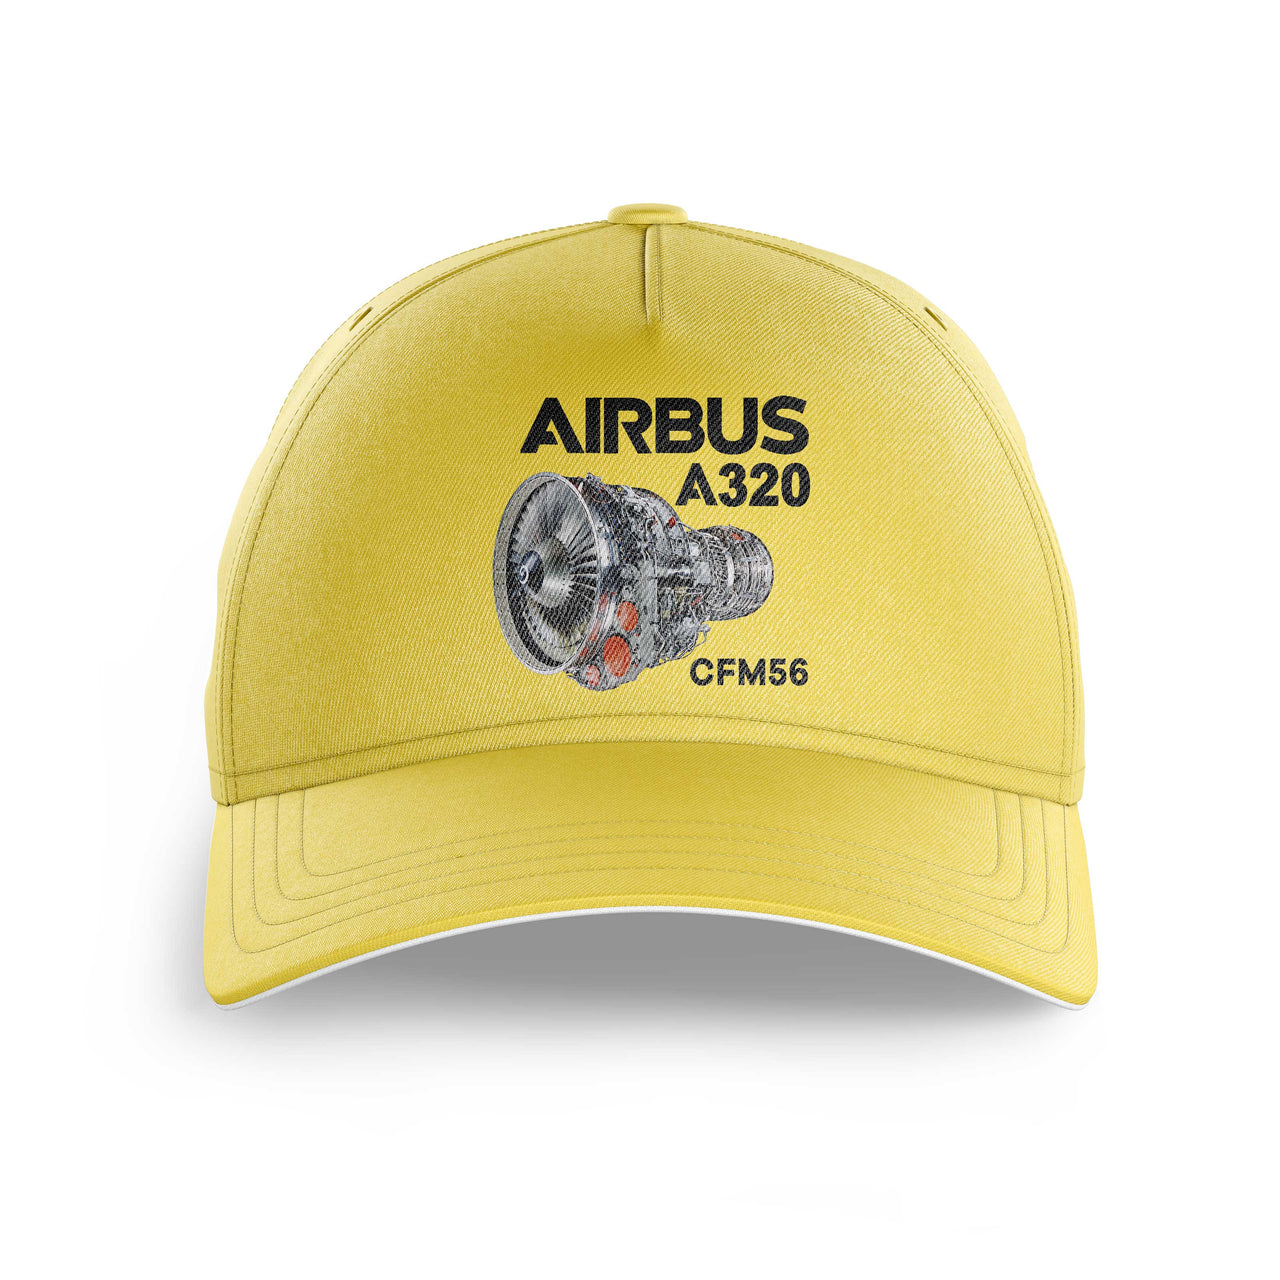 Airbus A320 & CFM56 Engine Printed Hats